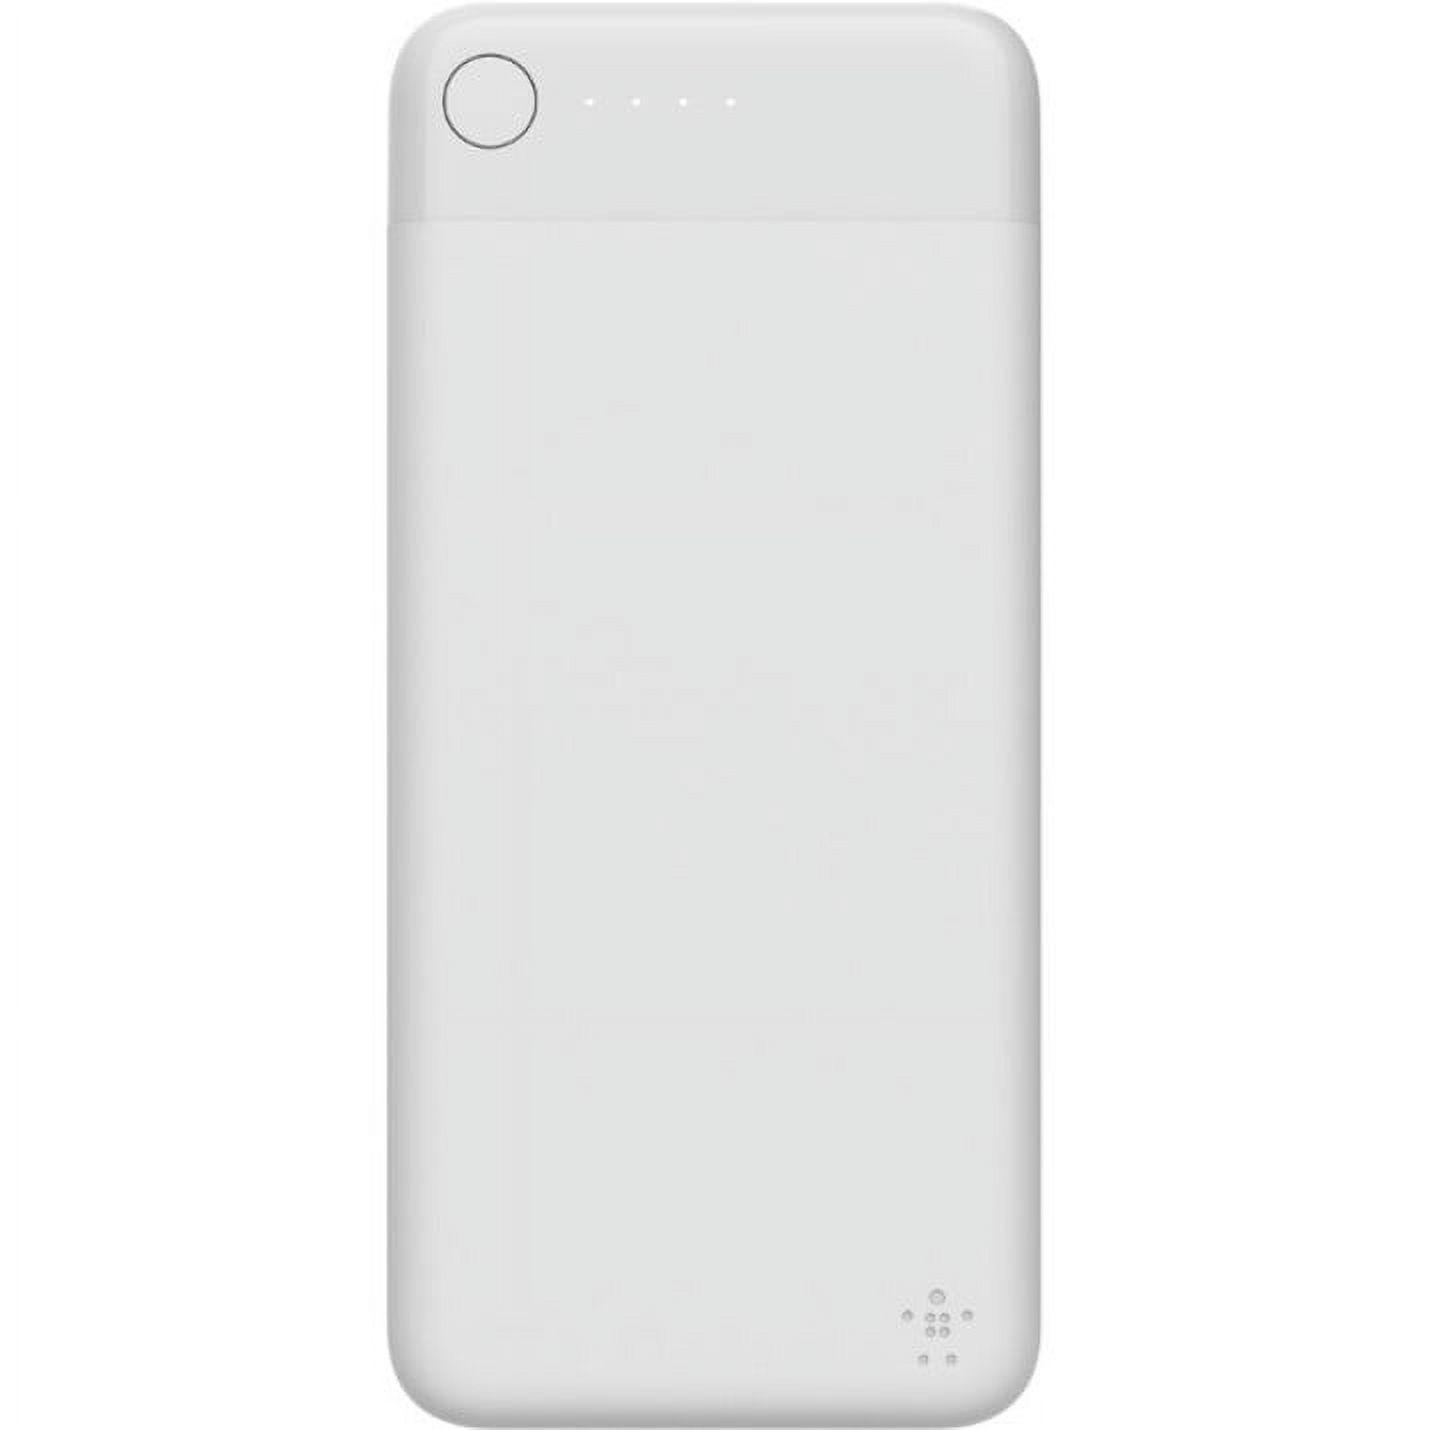 Belkin BOOST���CHARGE Power Bank 10K with Lightning Connector - image 5 of 5